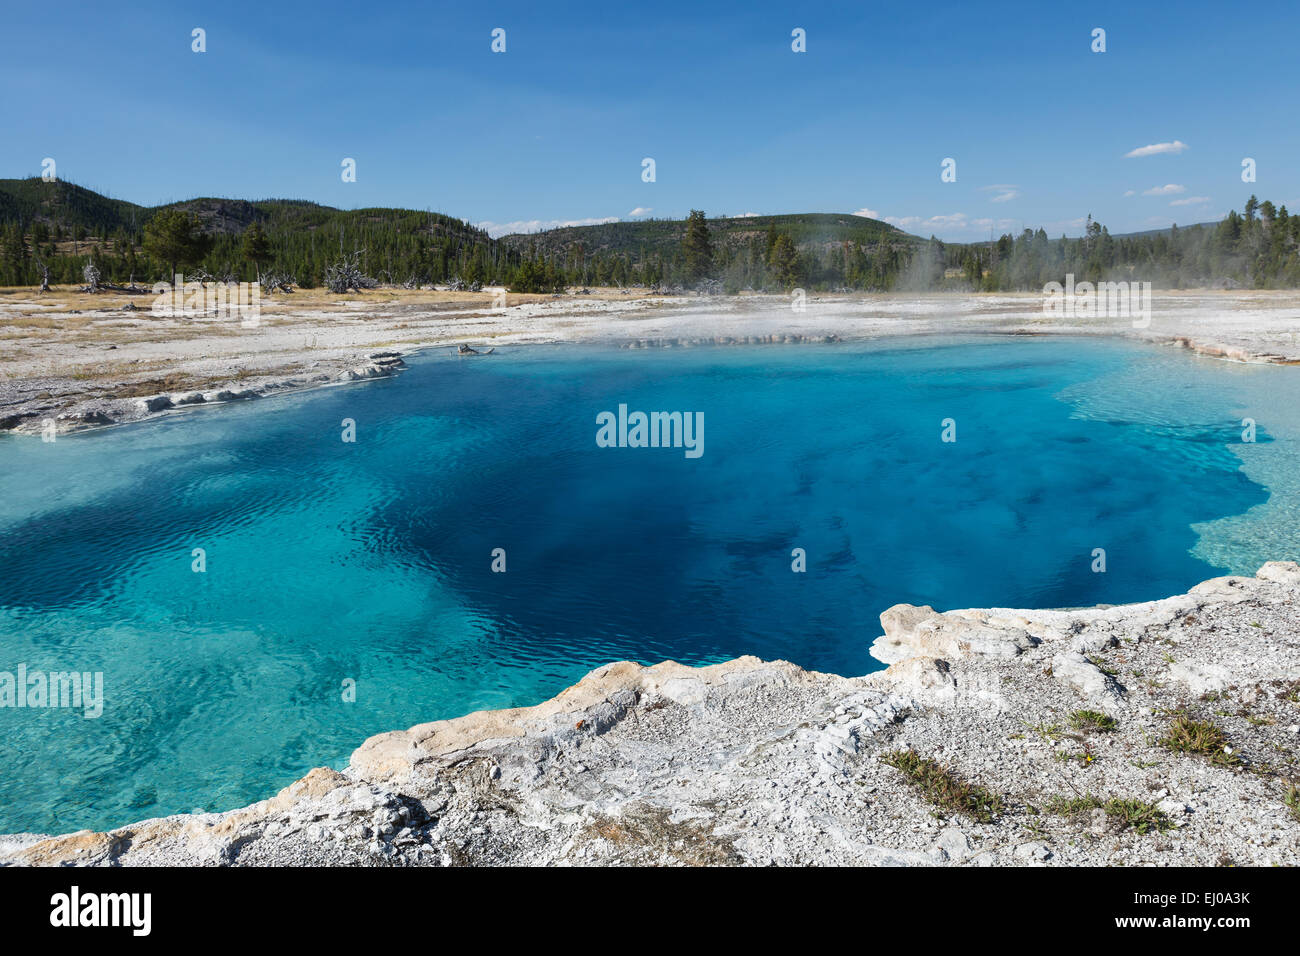 Beautiful blue water of Sapphire Pool, Biscuit Basin, in the Upper Geyser Basin. Yellowstone National Park, Wyoming, USA. Stock Photo